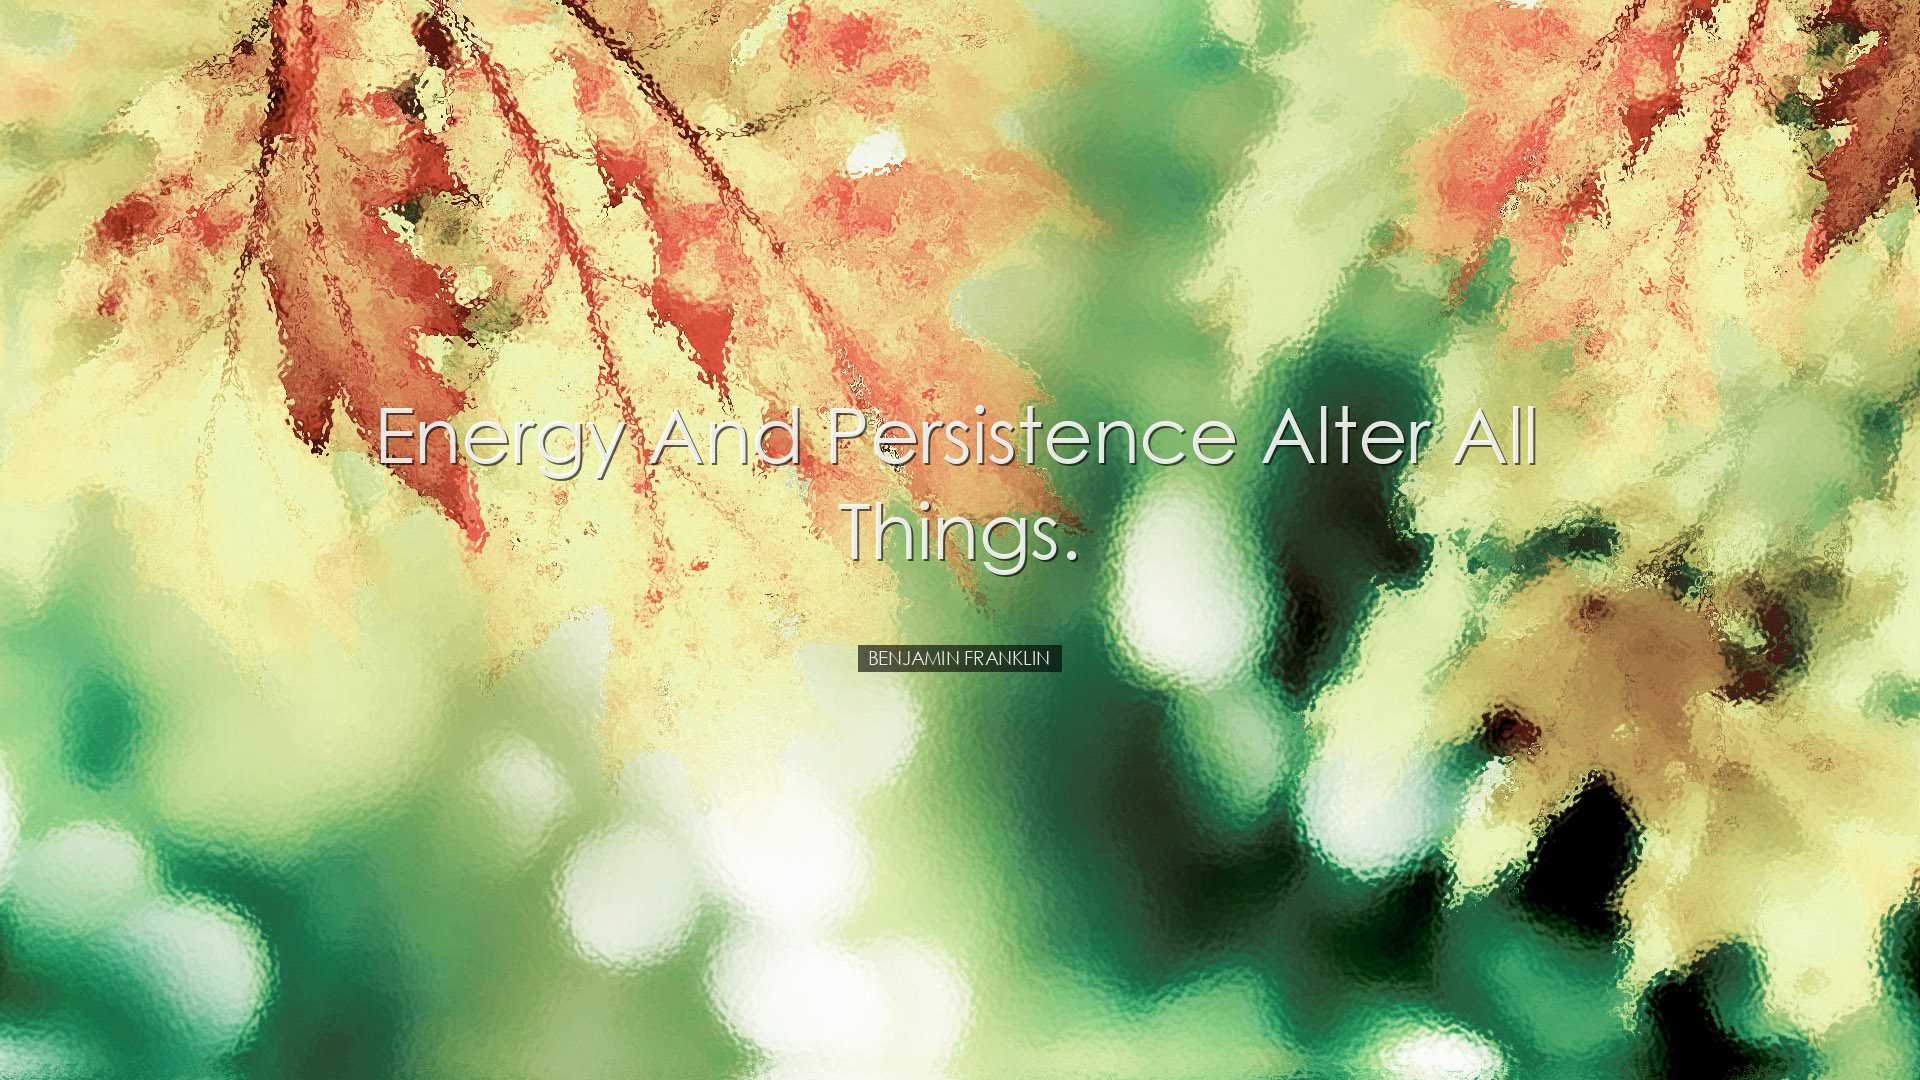 Energy and persistence alter all things. - Benjamin Franklin